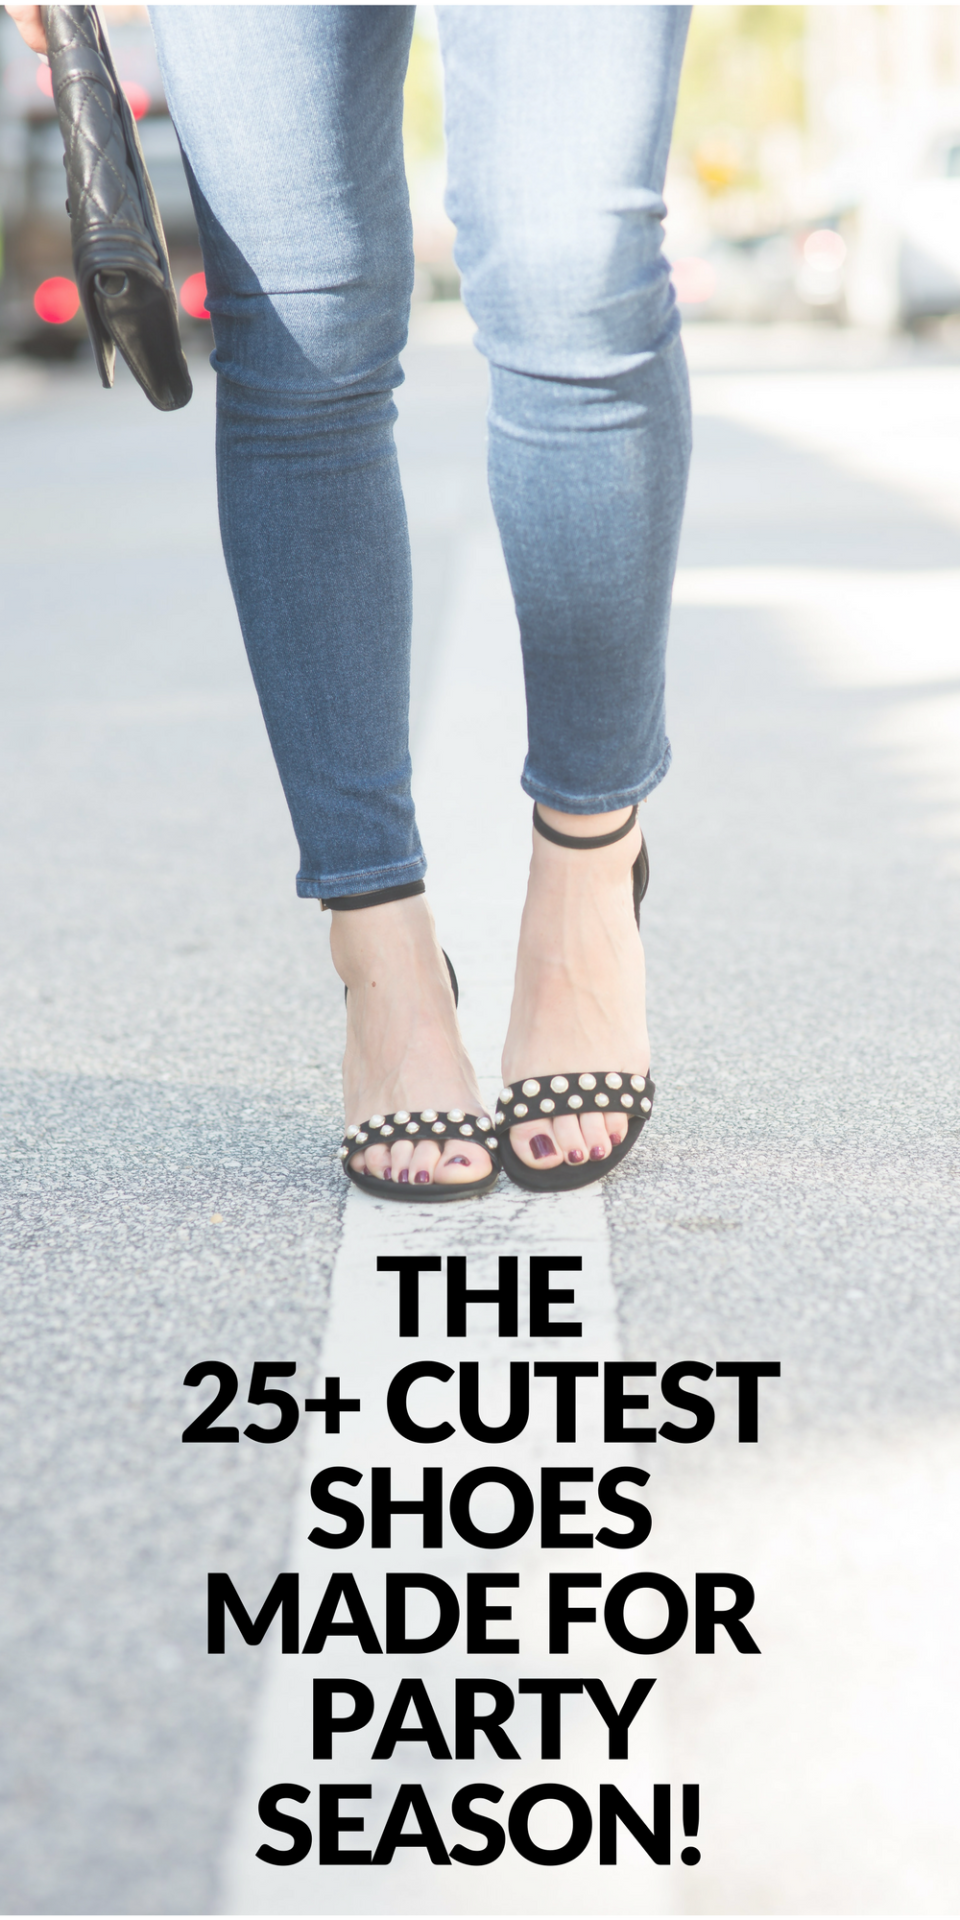 The 25+ Cutest Party Heels, Flats & Booties for this Holiday Season // @themodernsavvy